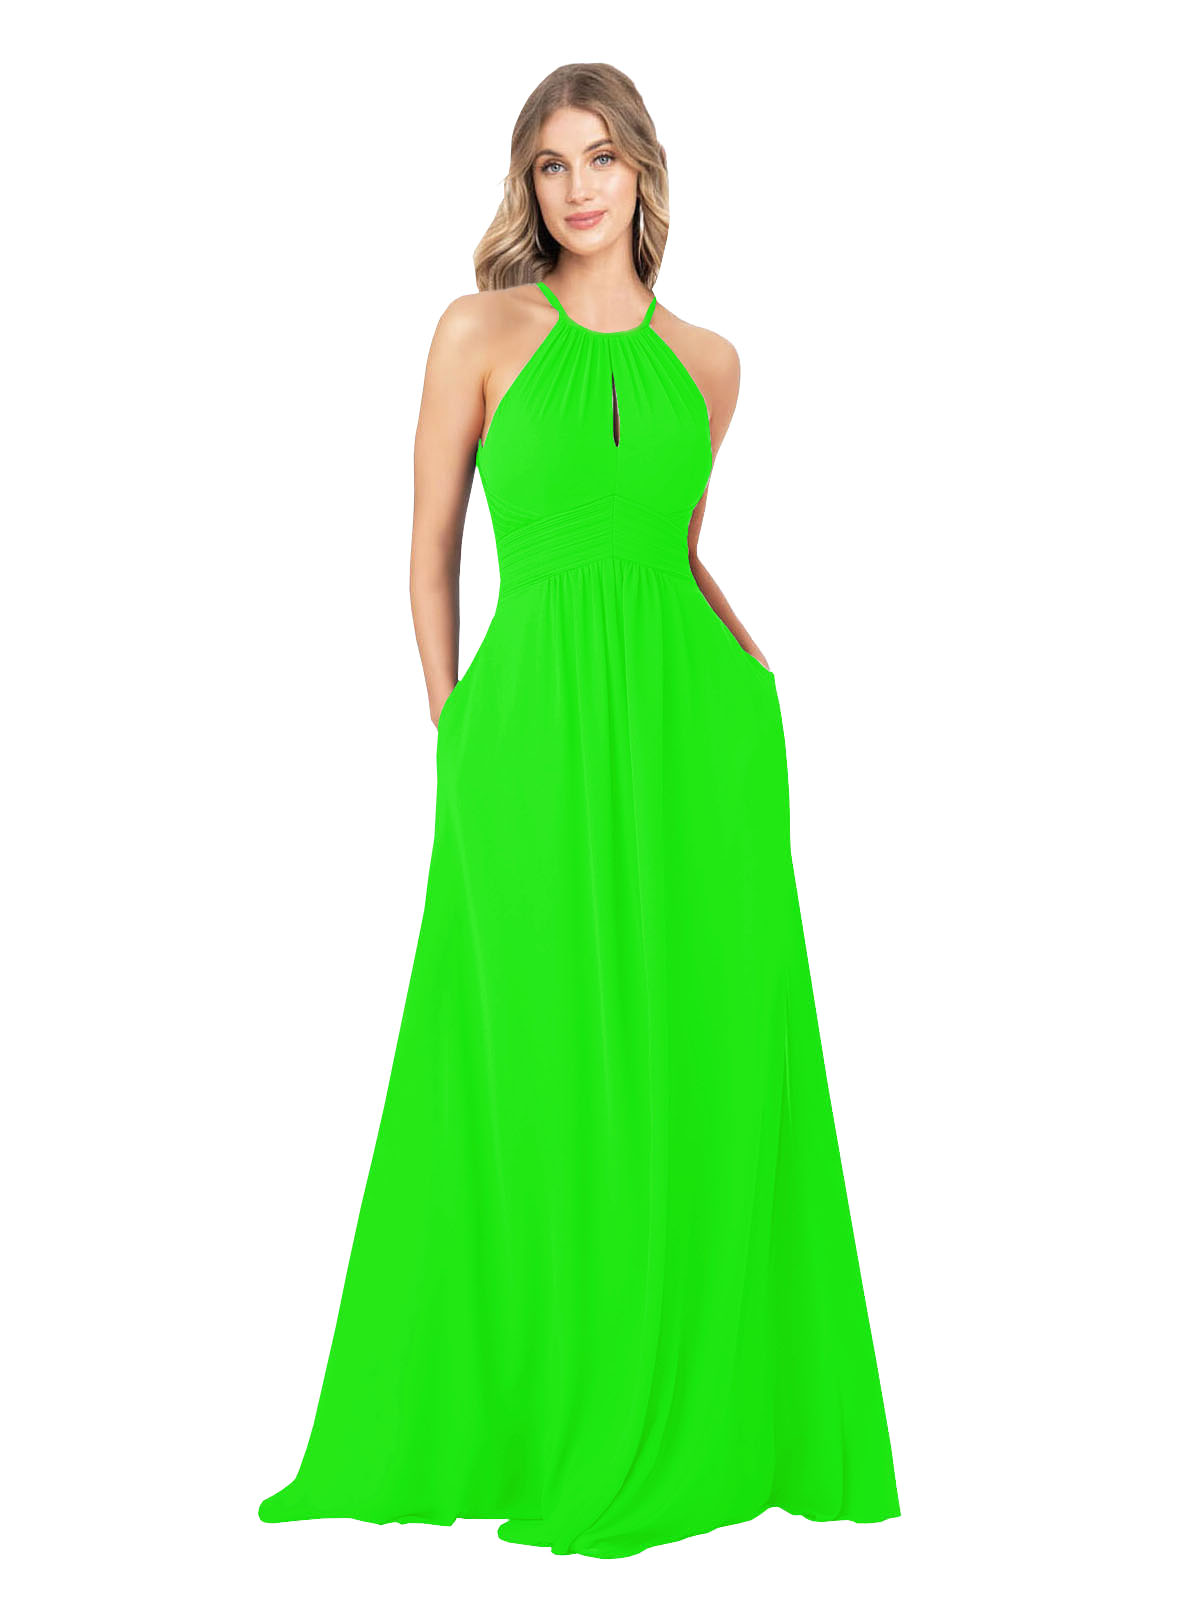 Lime Green A-Line High Neck Sleeveless Long Bridesmaid Dress Cassiopeia